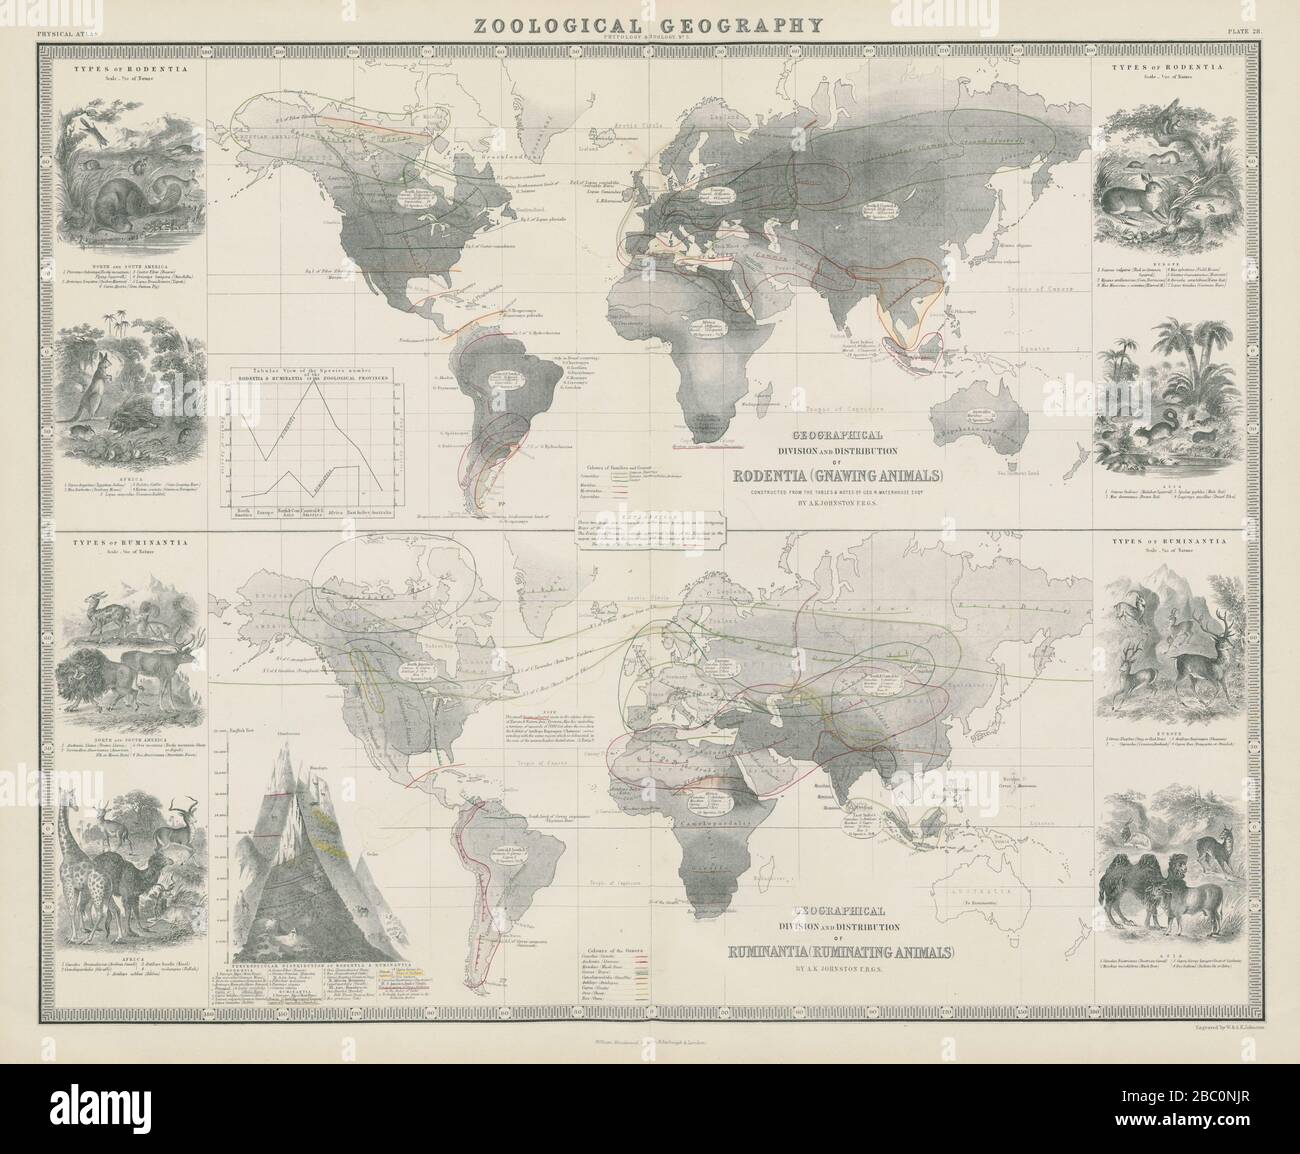 Zoological Geography. Rodentia & Ruminantia distribution 1856 old antique map Stock Photo